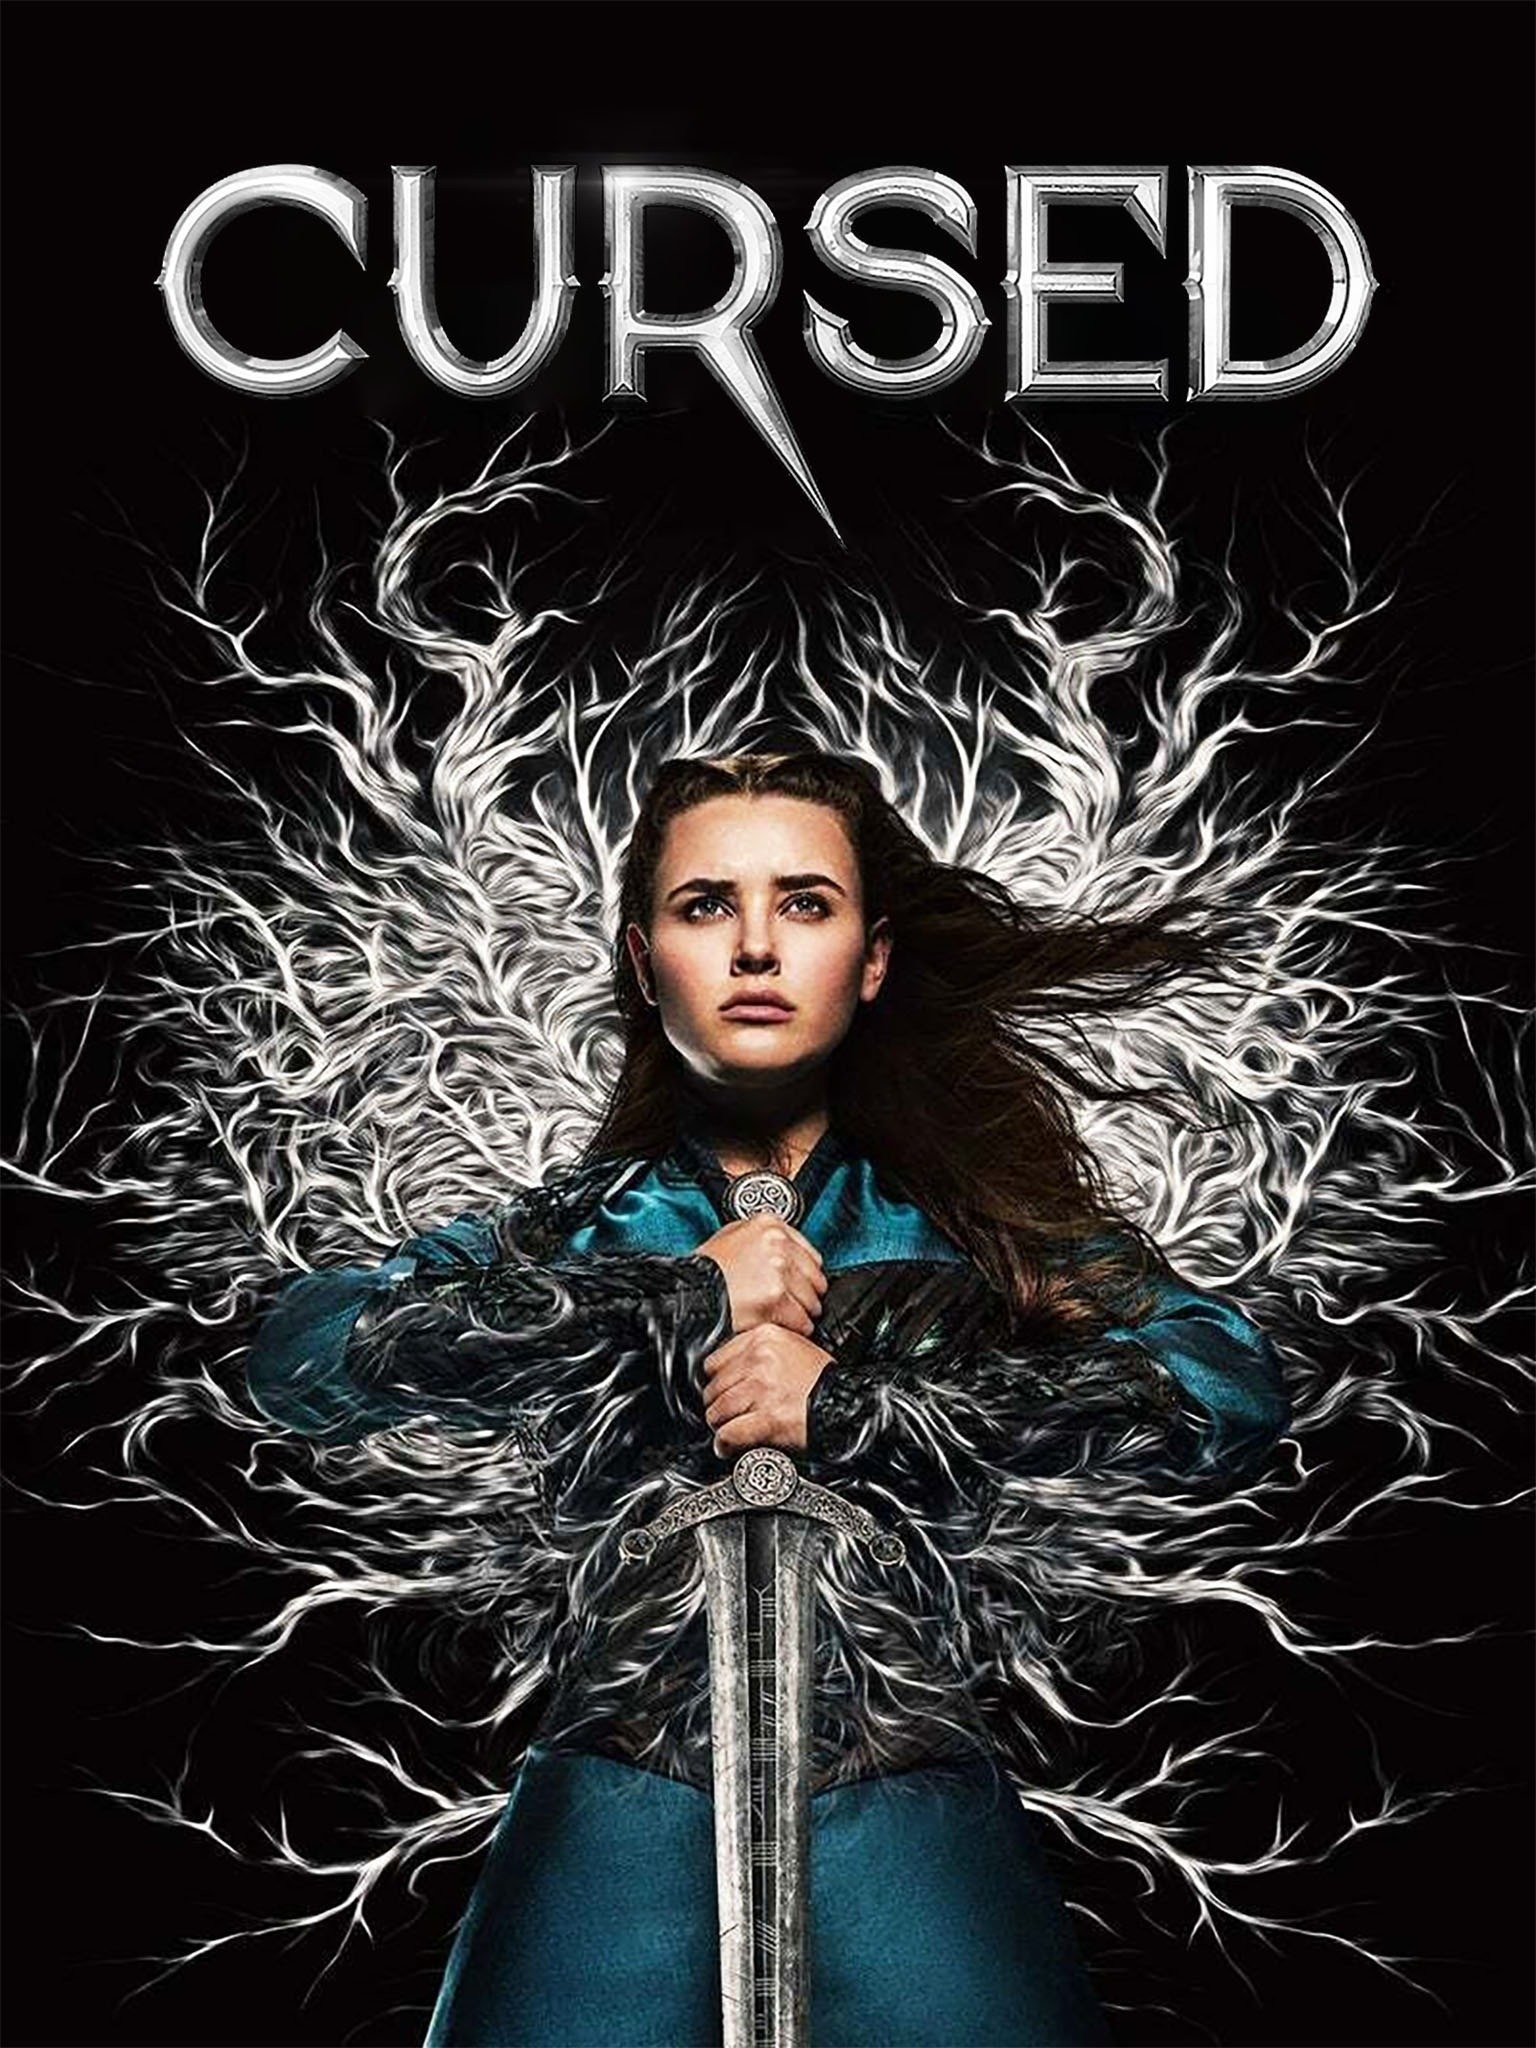 What Happens To Nimue? Ending Of Cursed S1 Explained